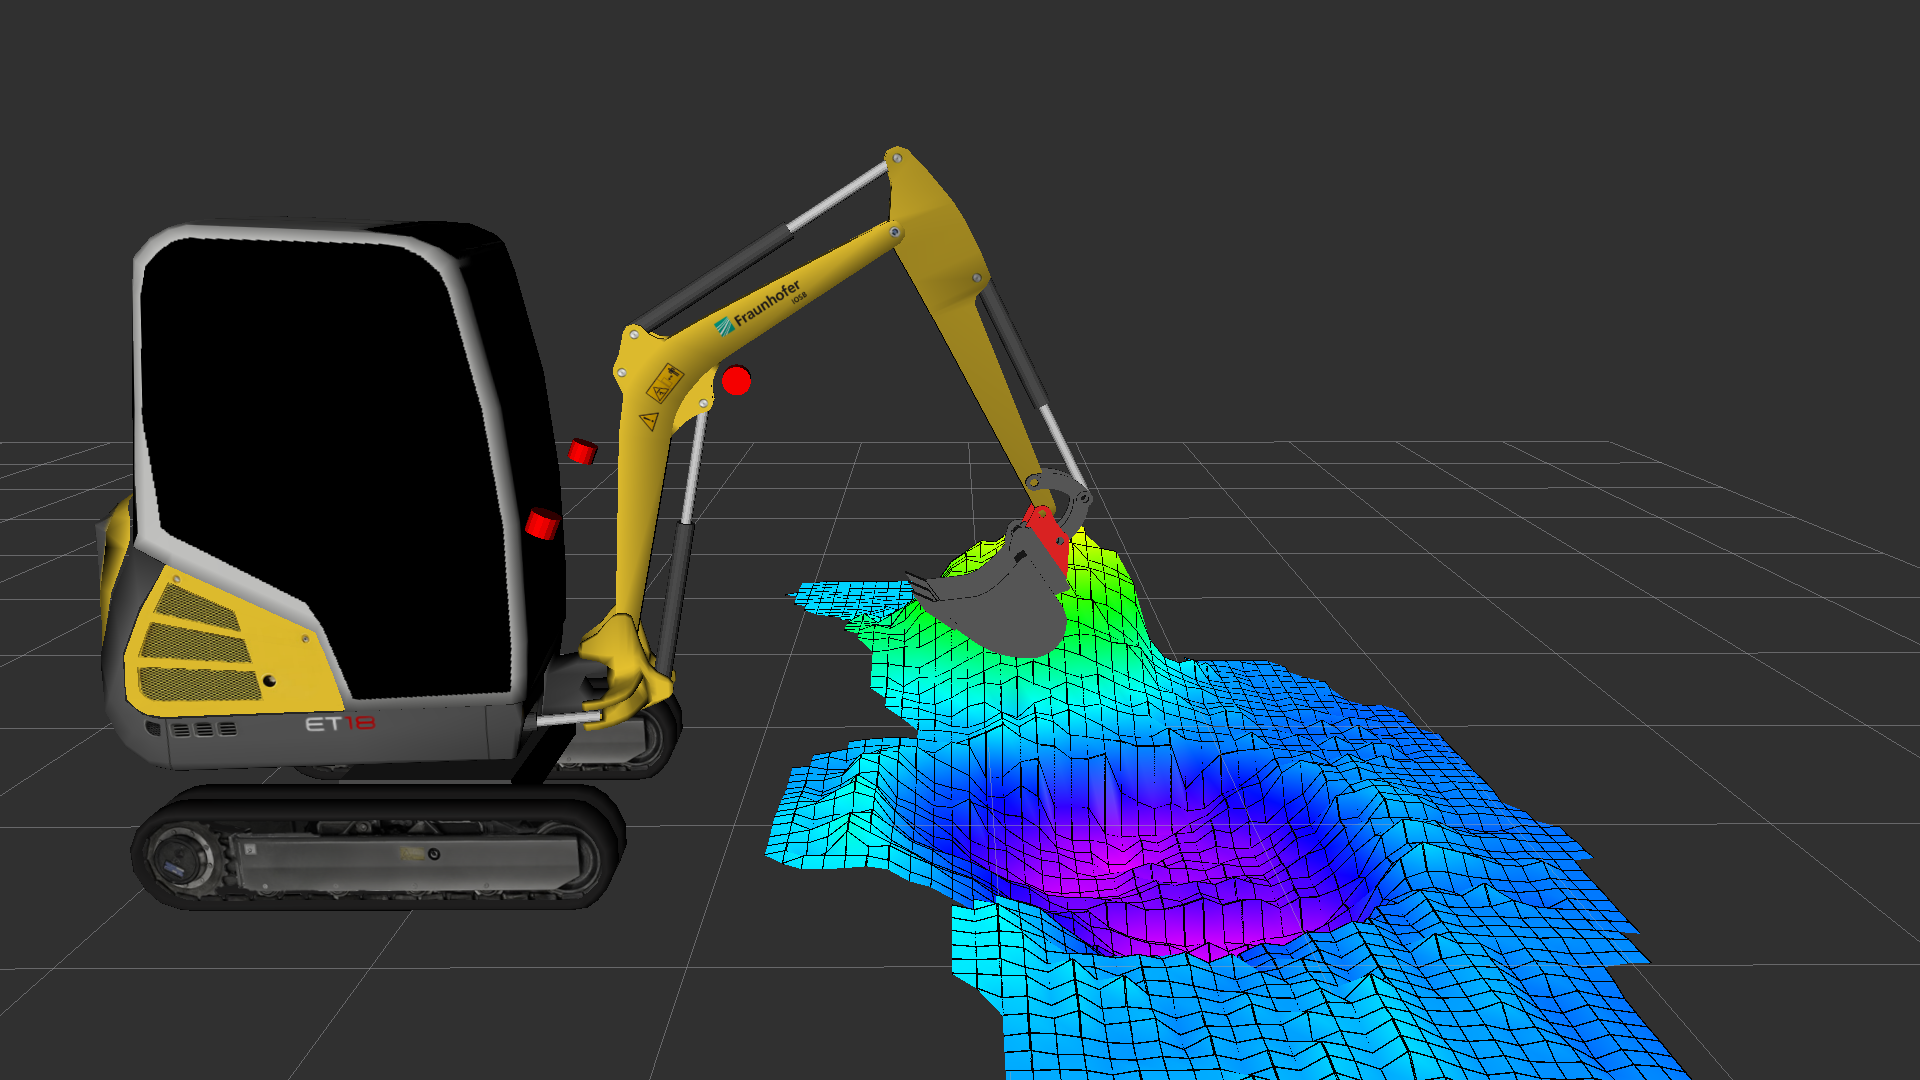 Visualization of an autonomous excavator and volumetric mapping of its environment